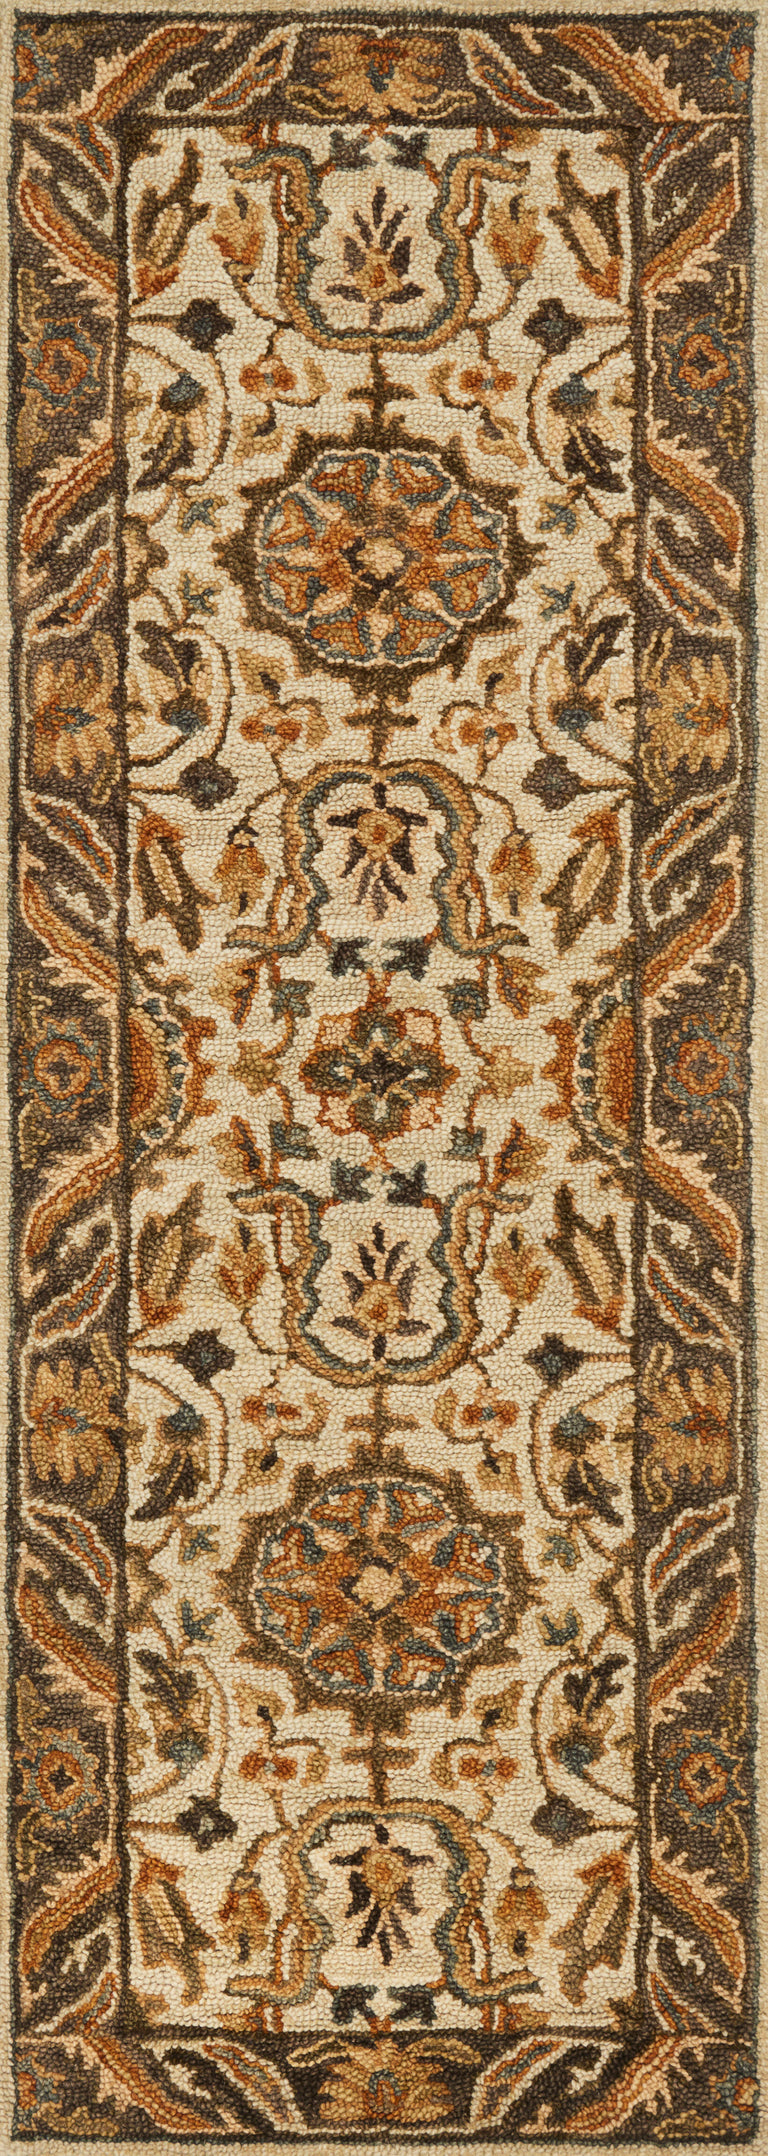 Loloi Rugs Victoria Collection Rug in Ivory, Dk Taupe - 9'3" x 13'